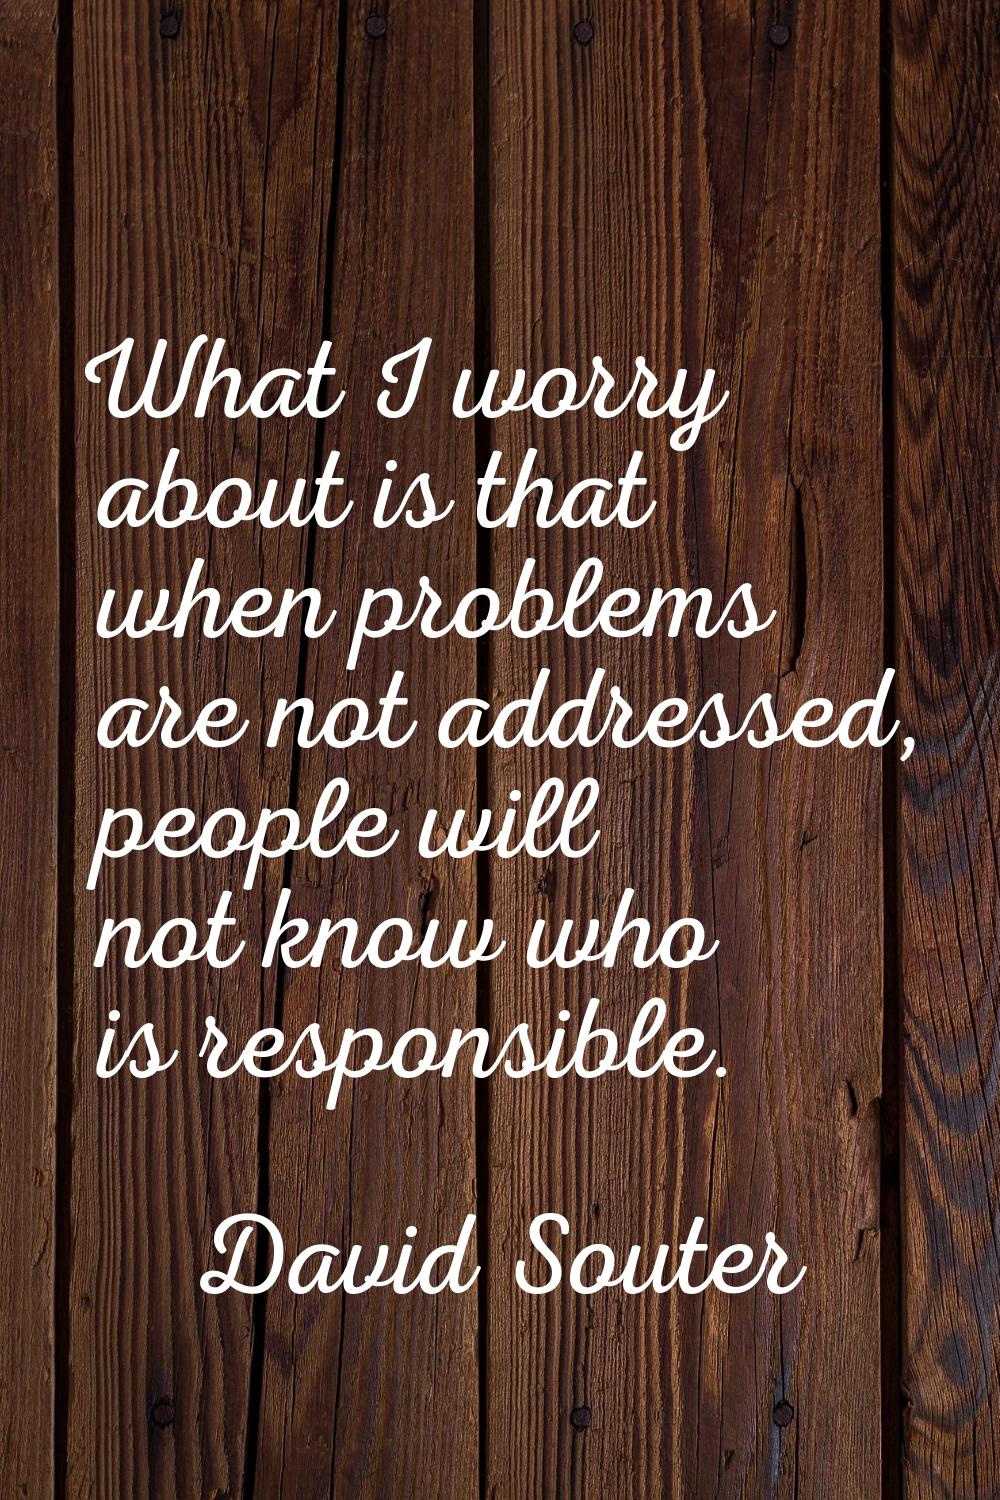 What I worry about is that when problems are not addressed, people will not know who is responsible